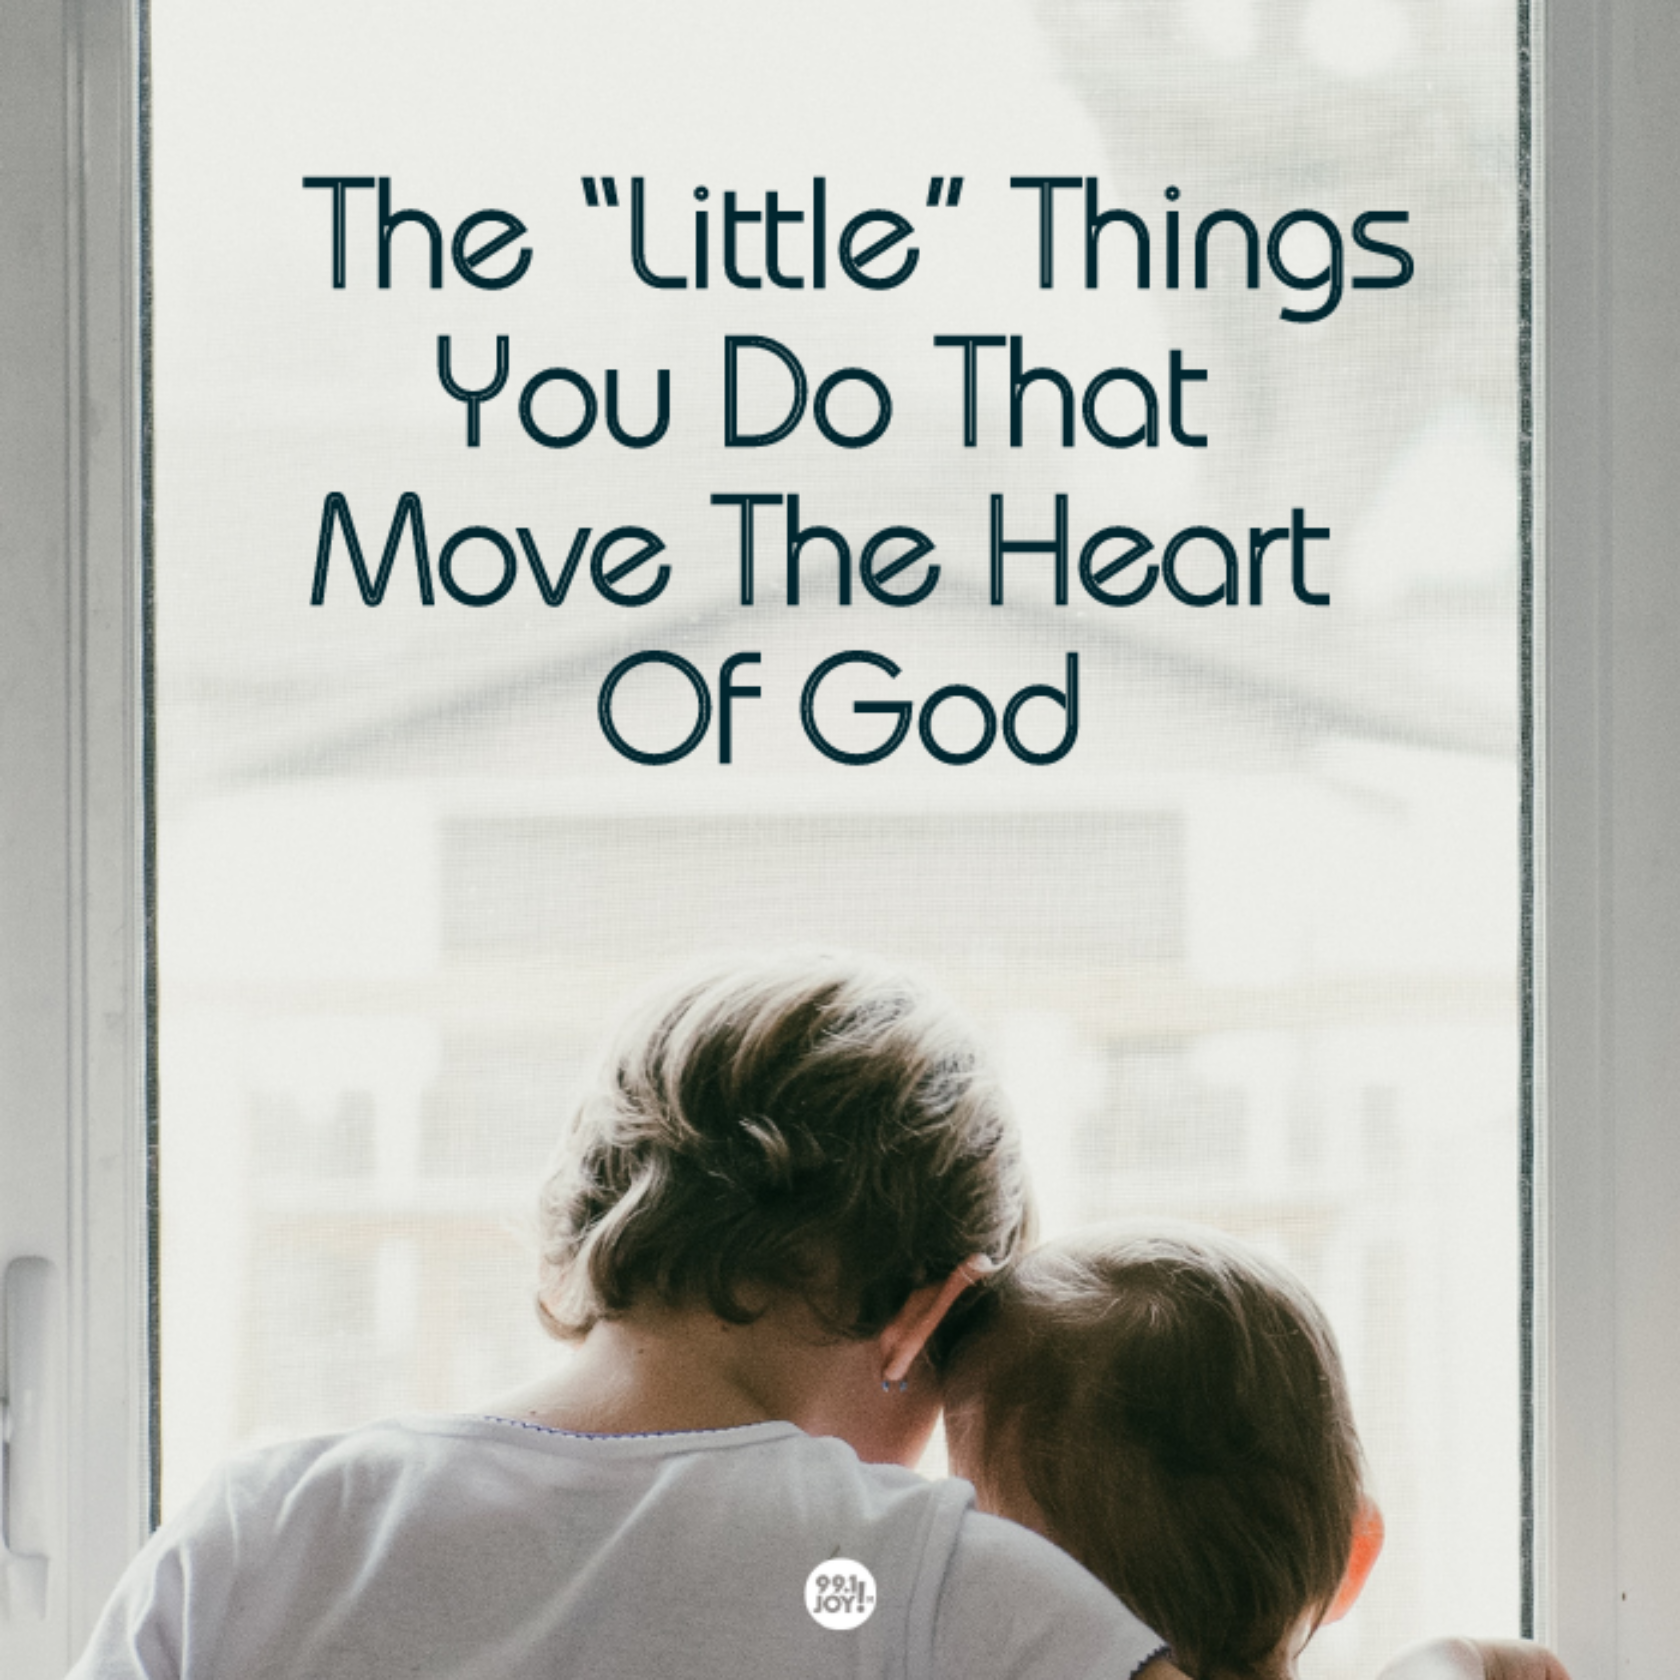 The “Little” Things You Do That Move The Heart Of God